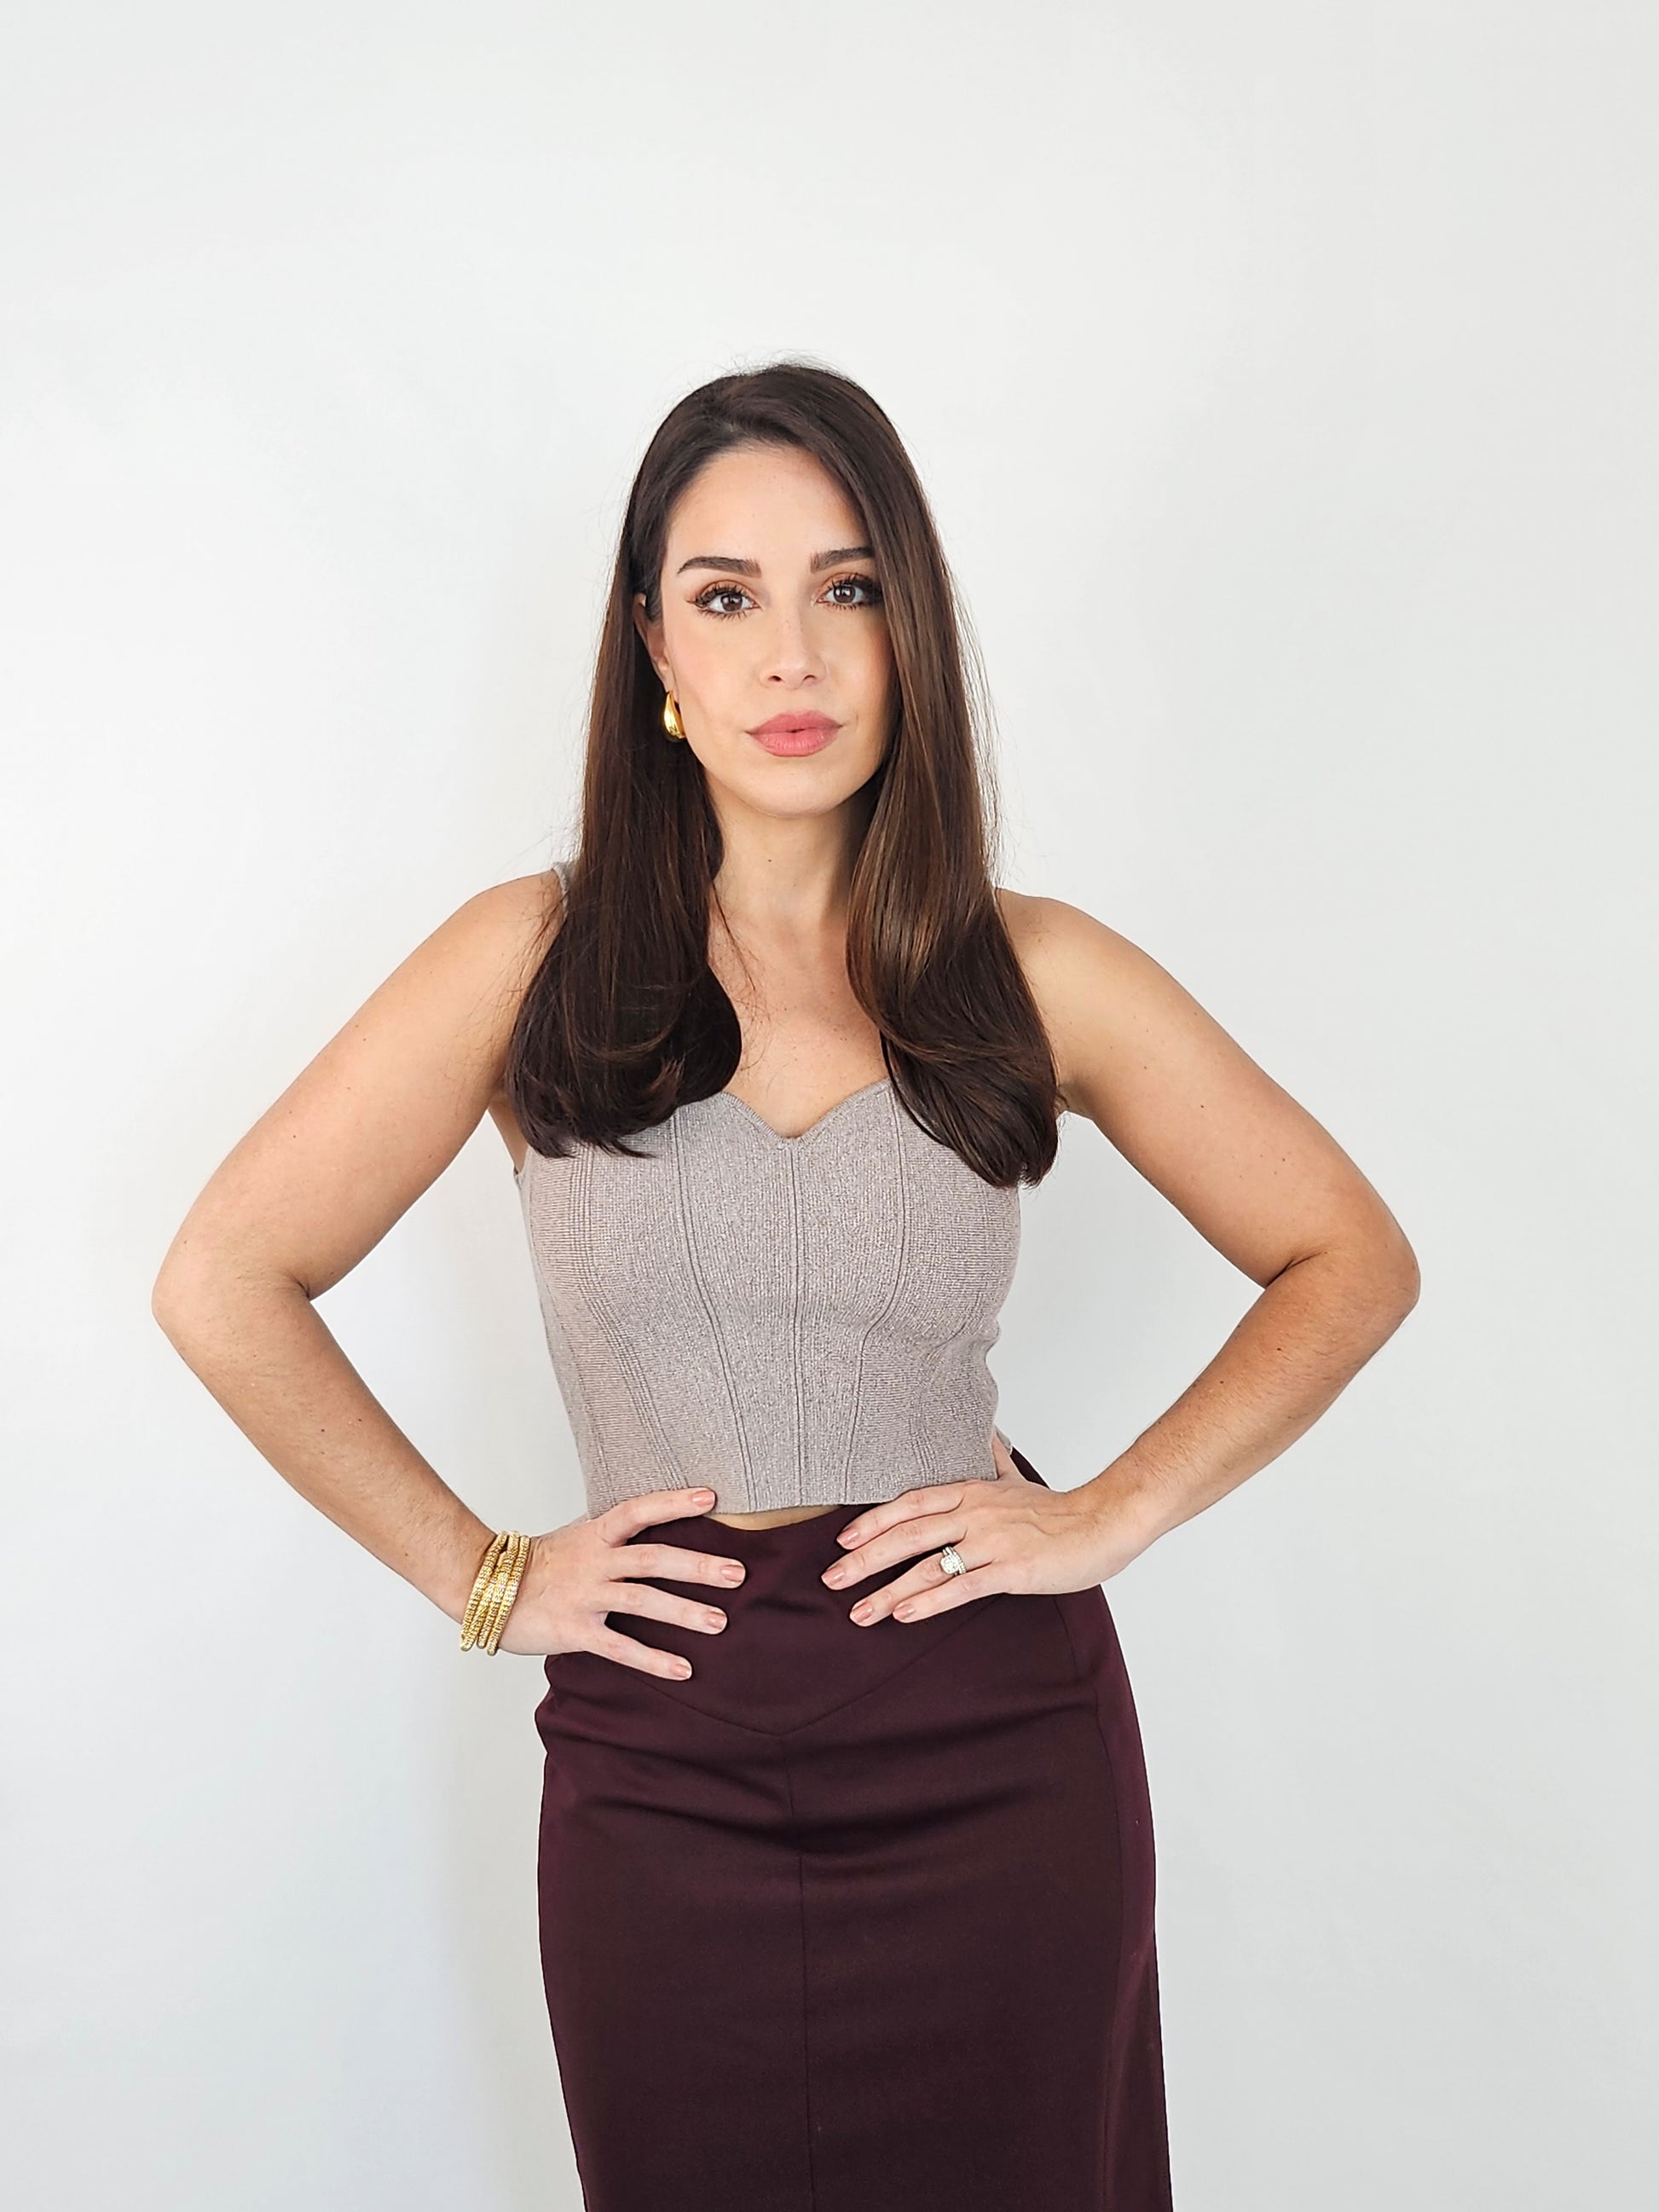 Sleeveless knit top can be paired with trouser, pants or a skirt and can be worn in multiple ways. This is a great capsule wardrobe piece to have in your wardrobe.